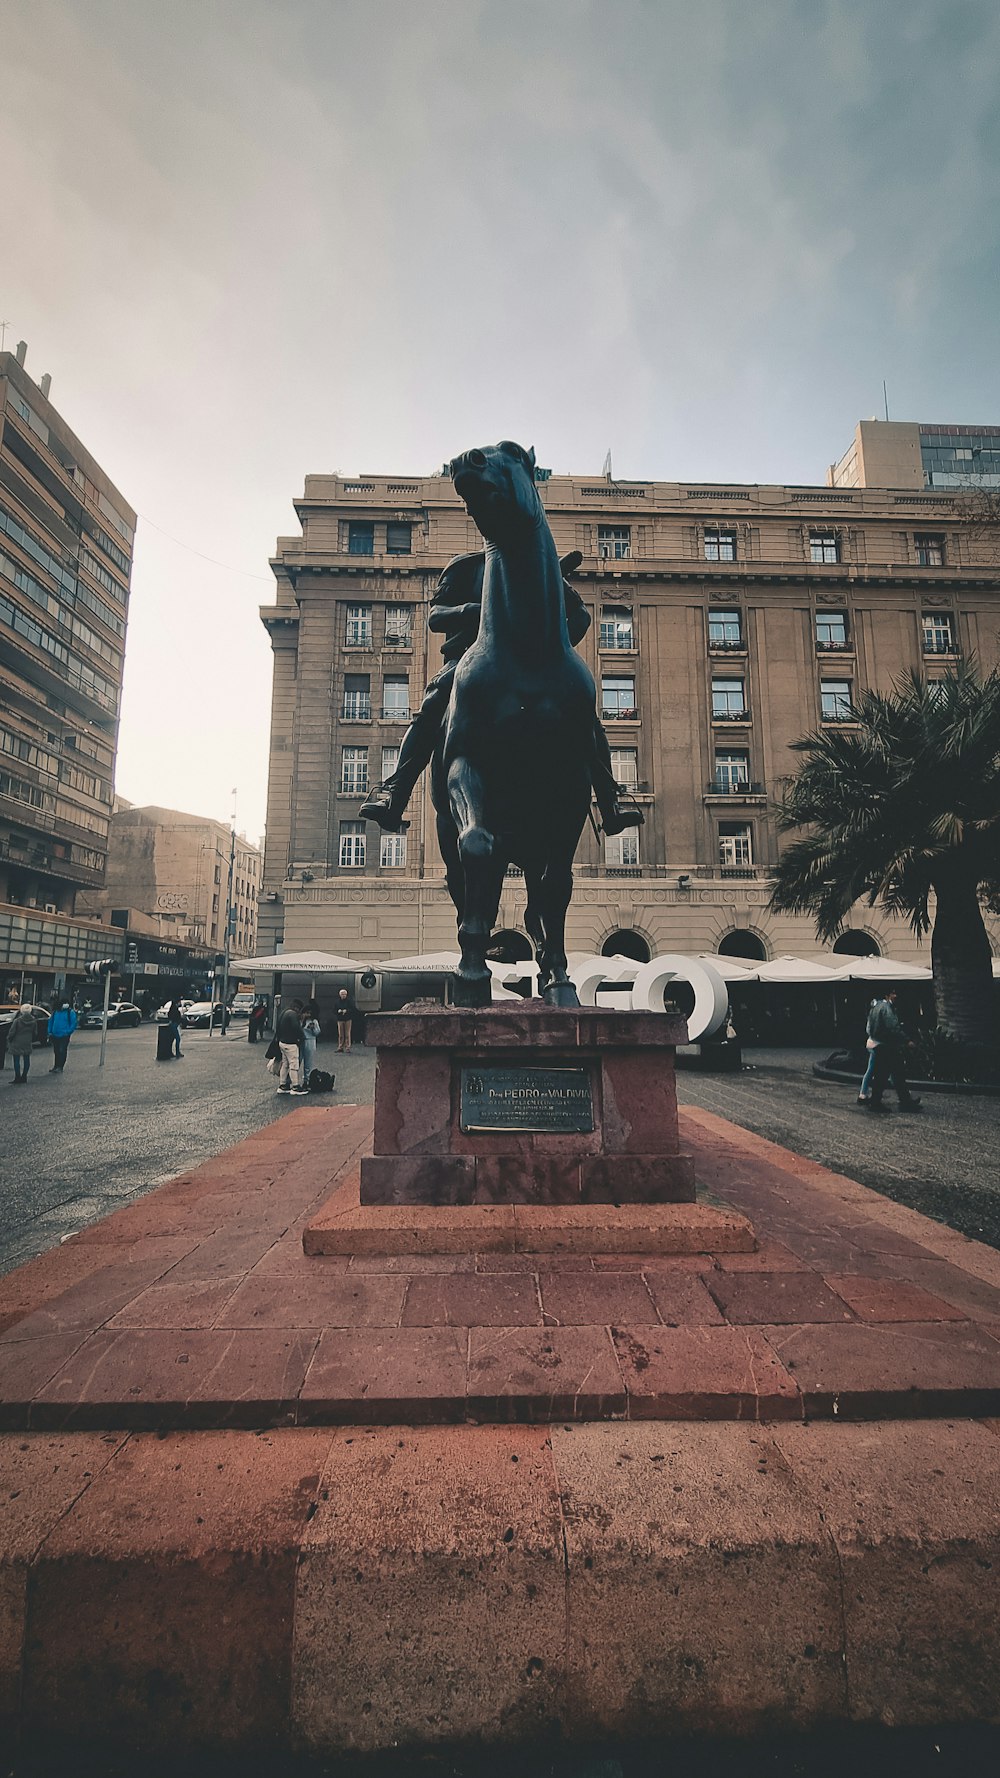 a statue of a person on a horse in a courtyard with buildings in the background